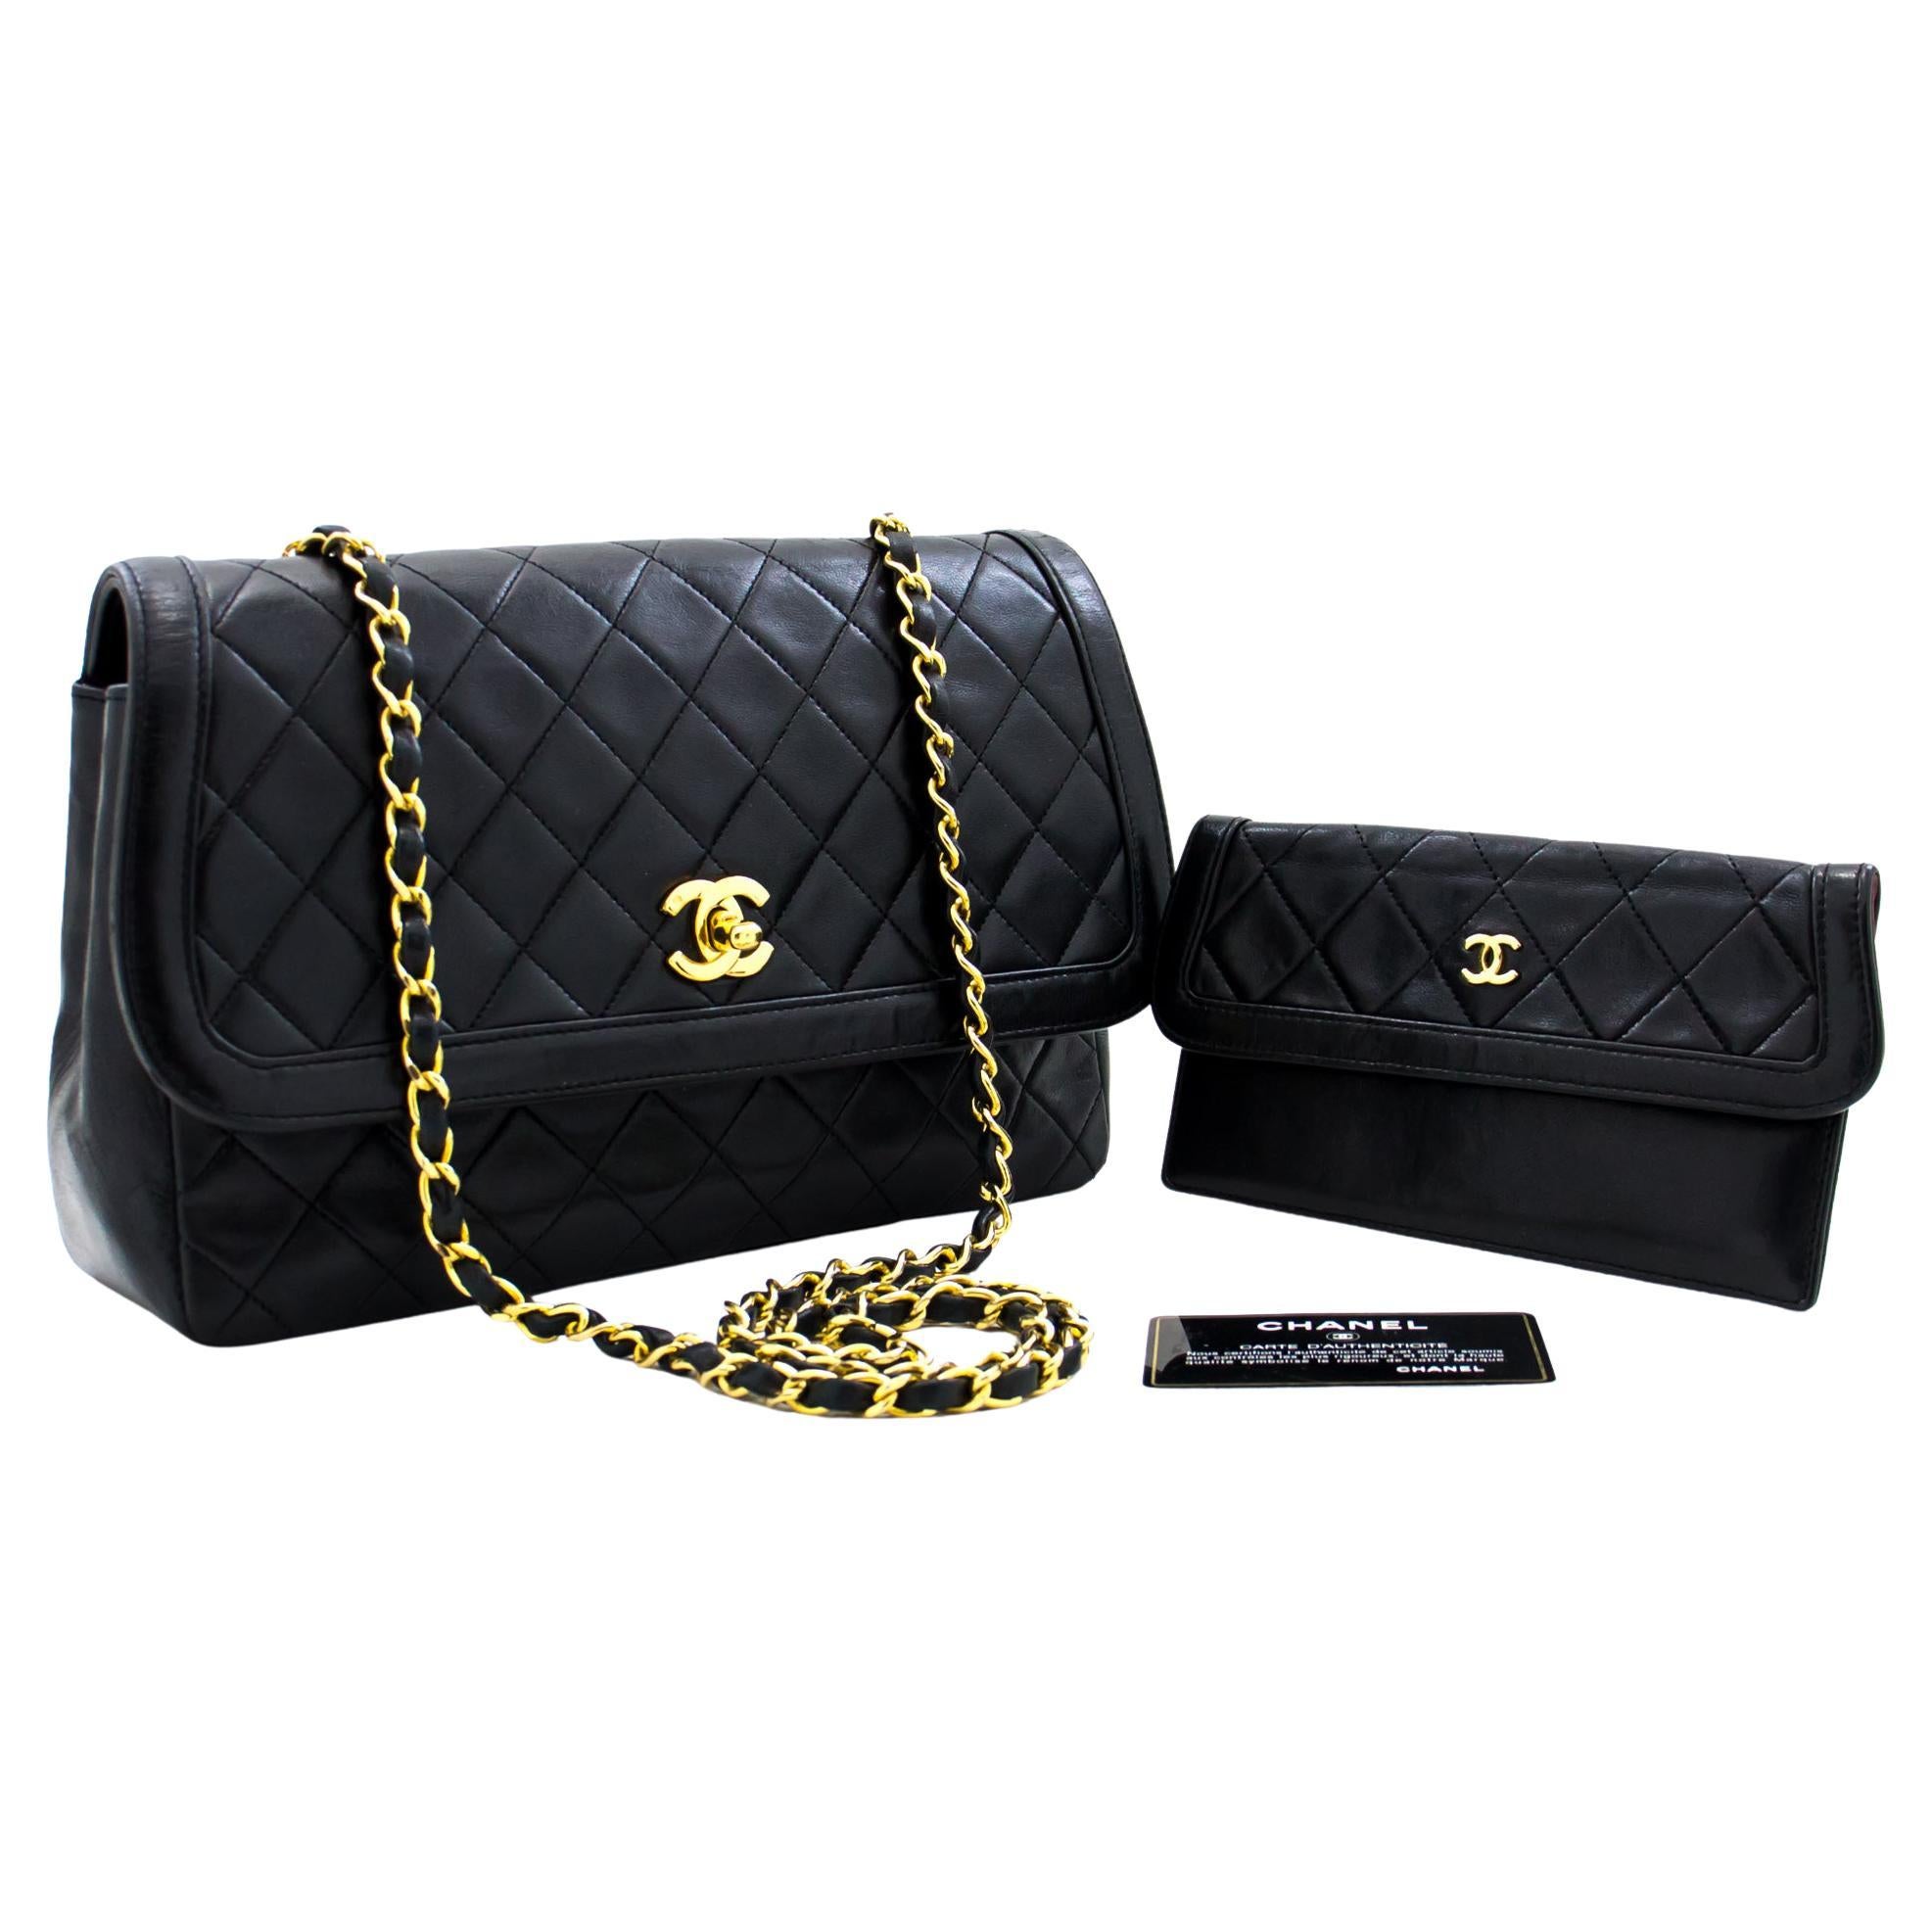 CHANEL Vintage Classic Chain Shoulder Bag Single Flap Quilted Lamb